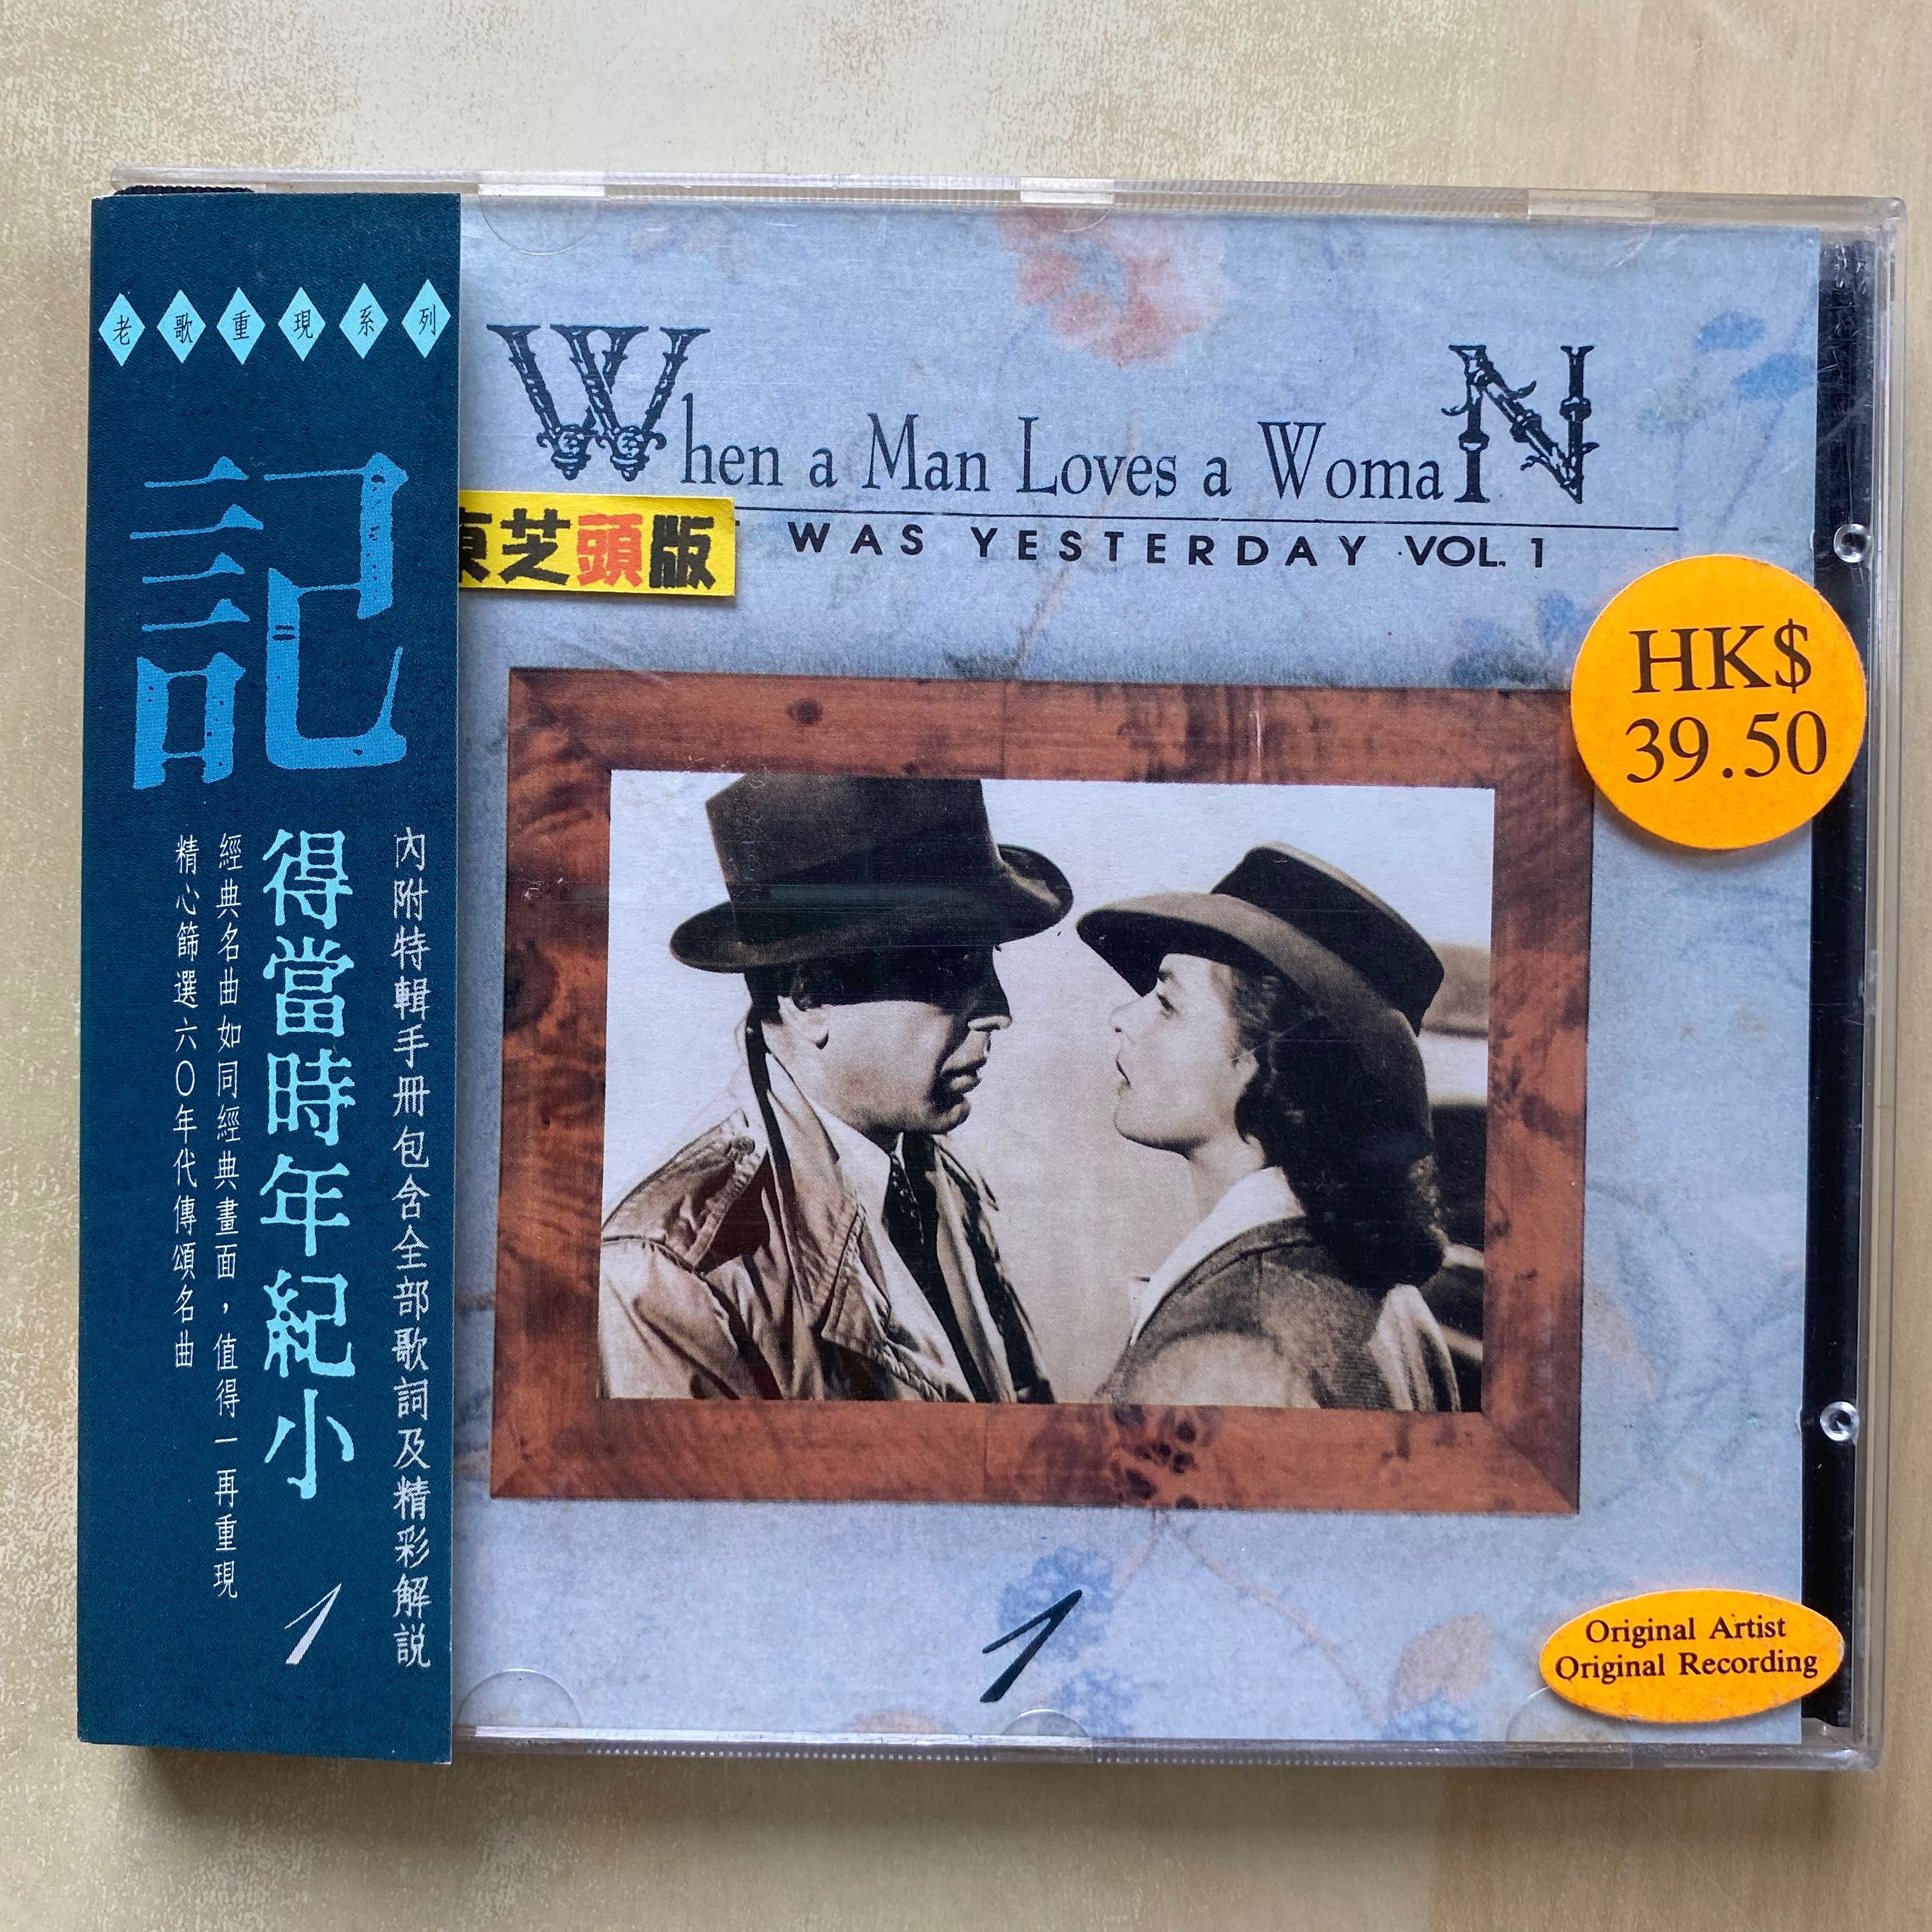 CD丨That was Yesterday Vol.1 - When a man loves a woman / 記得 